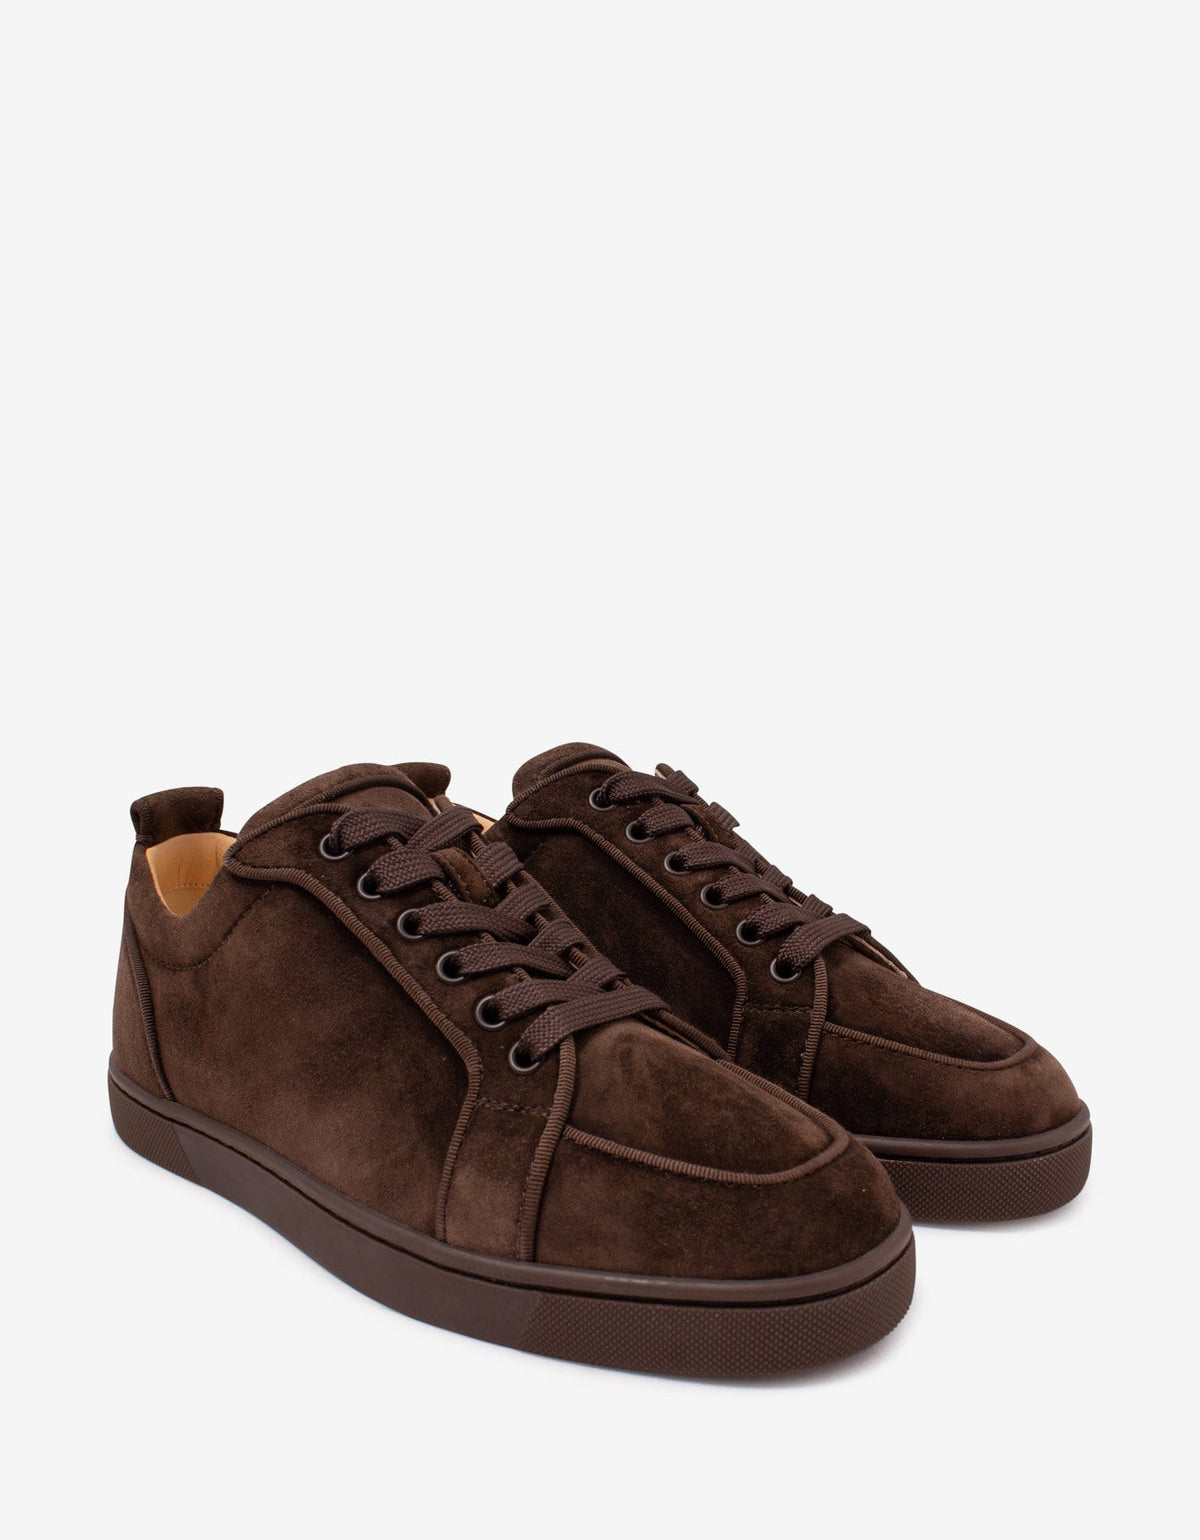 Christian Louboutin Rantulow Orlato Brown Suede Leather Trainers -